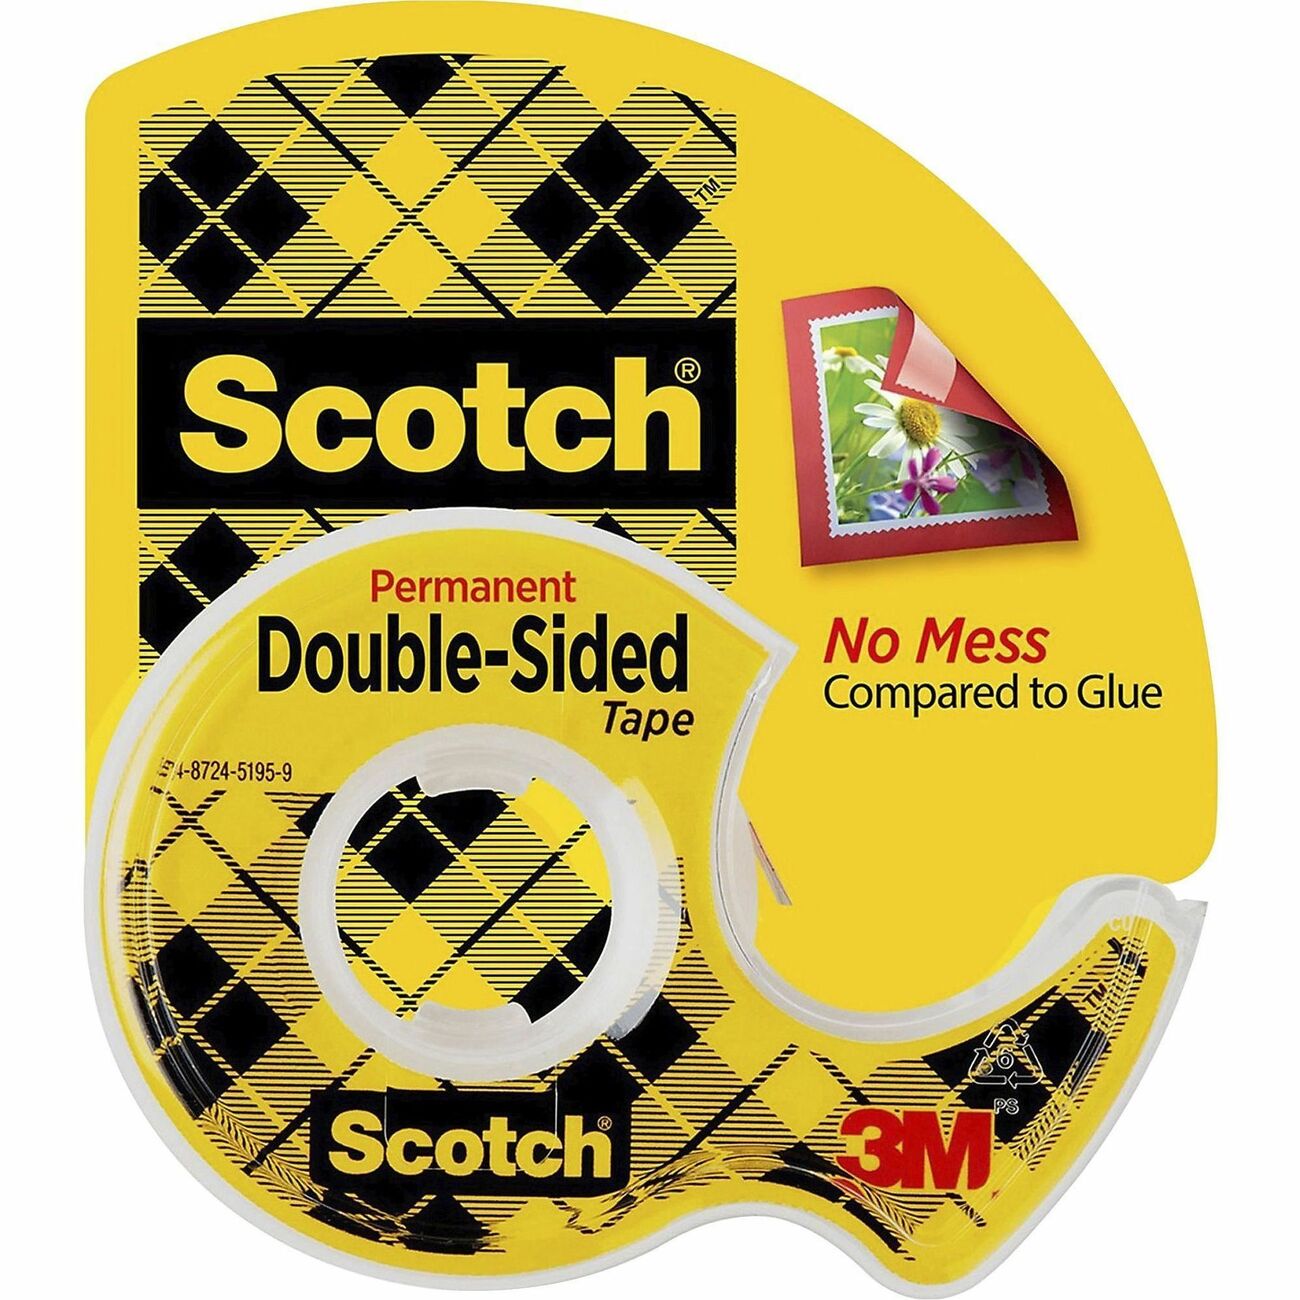 5 x Smoke Detector Magnetic Holders - Extra Strong 3M Adhesive